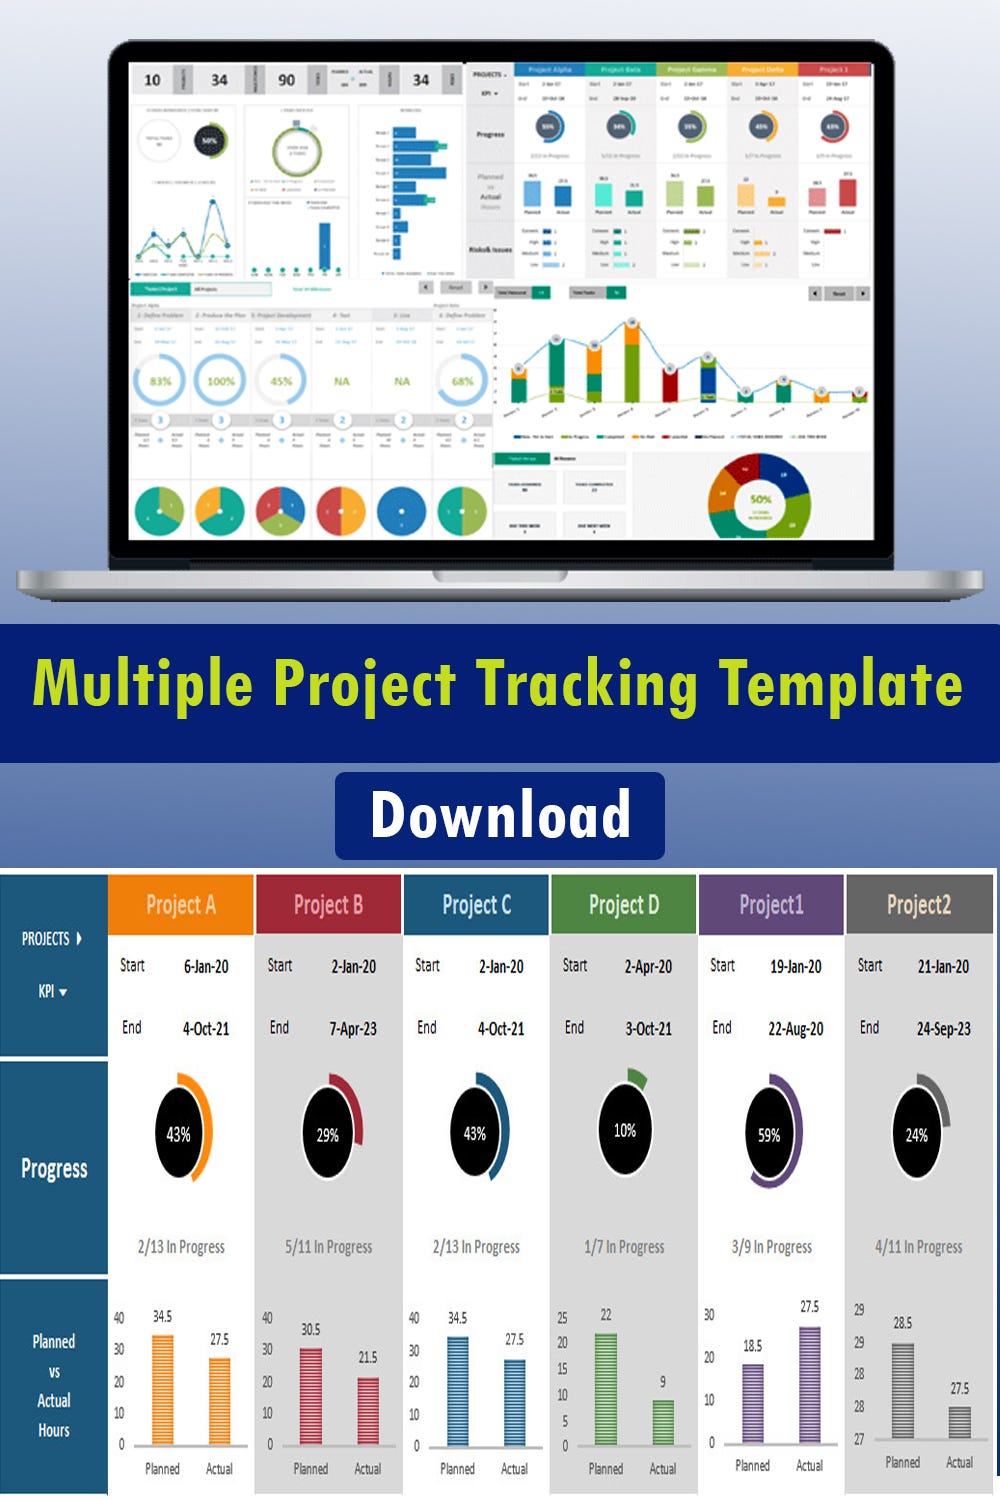 https://projectguide.net/project-tracking/multiple-project-tracking-template-excel/